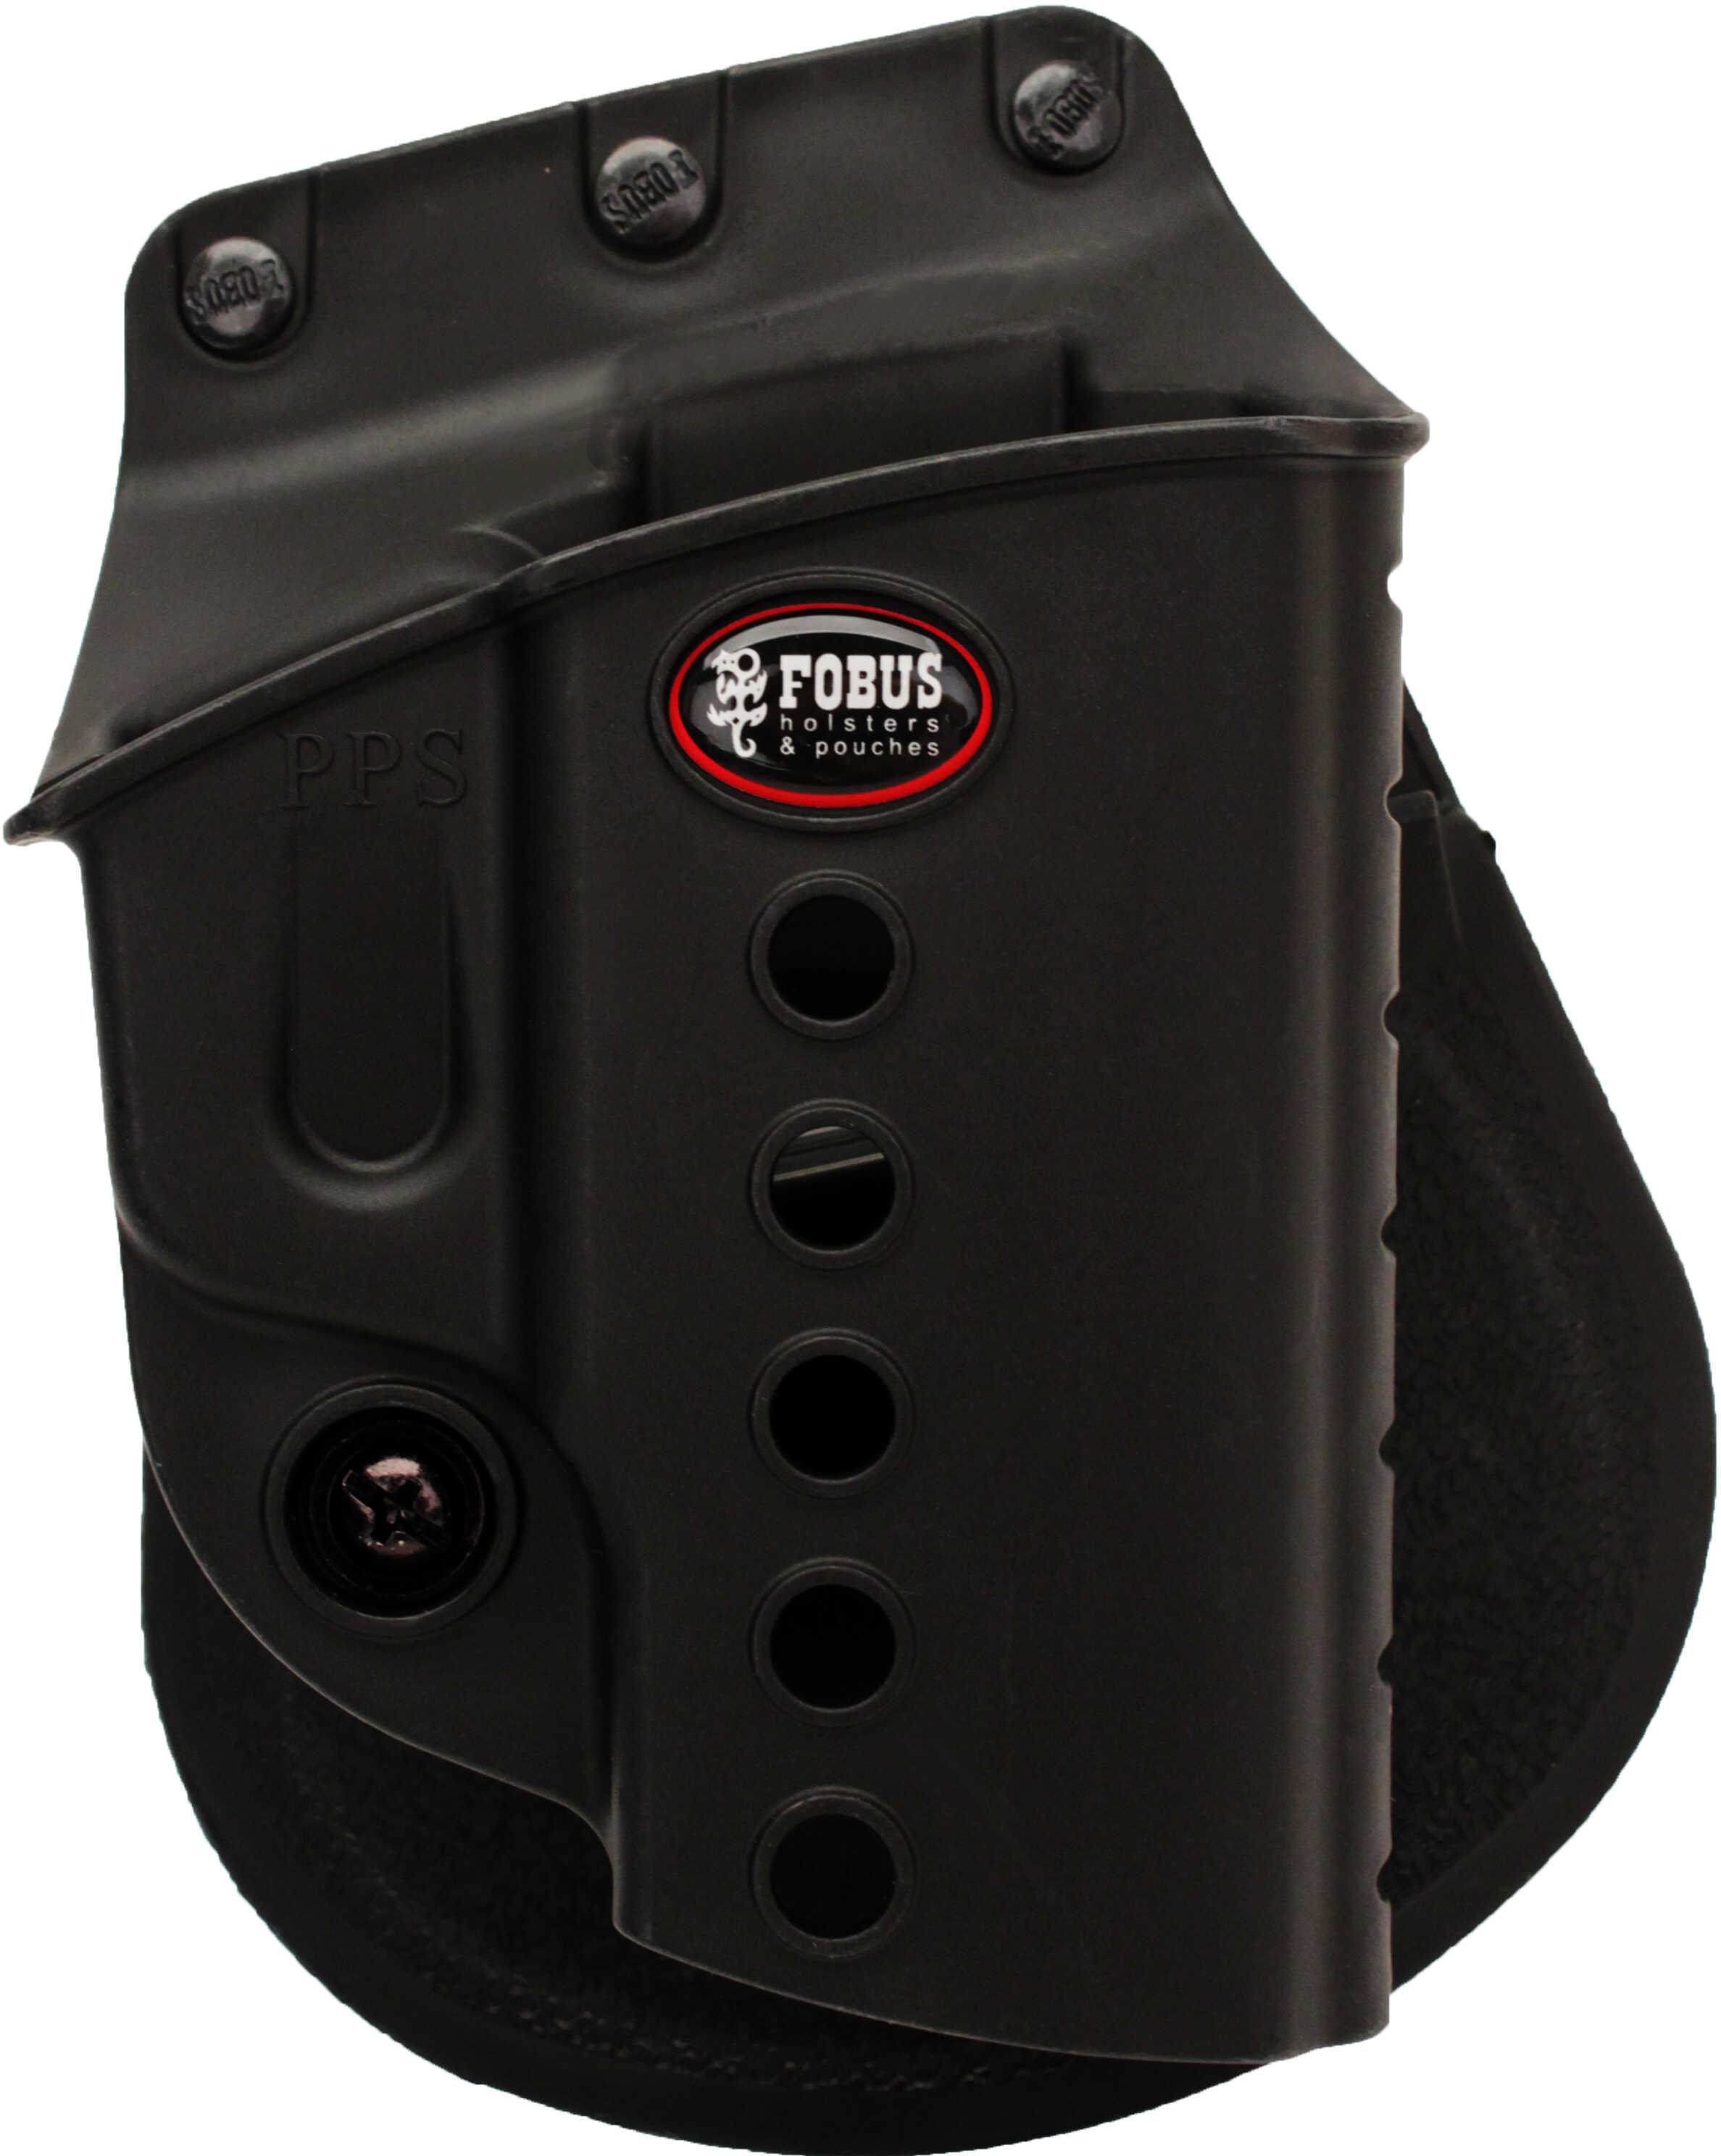 Fobus E2 Paddle Holster Fits Walther PPD/Taurus 709/ S&W Shield Right Hand Black SWS